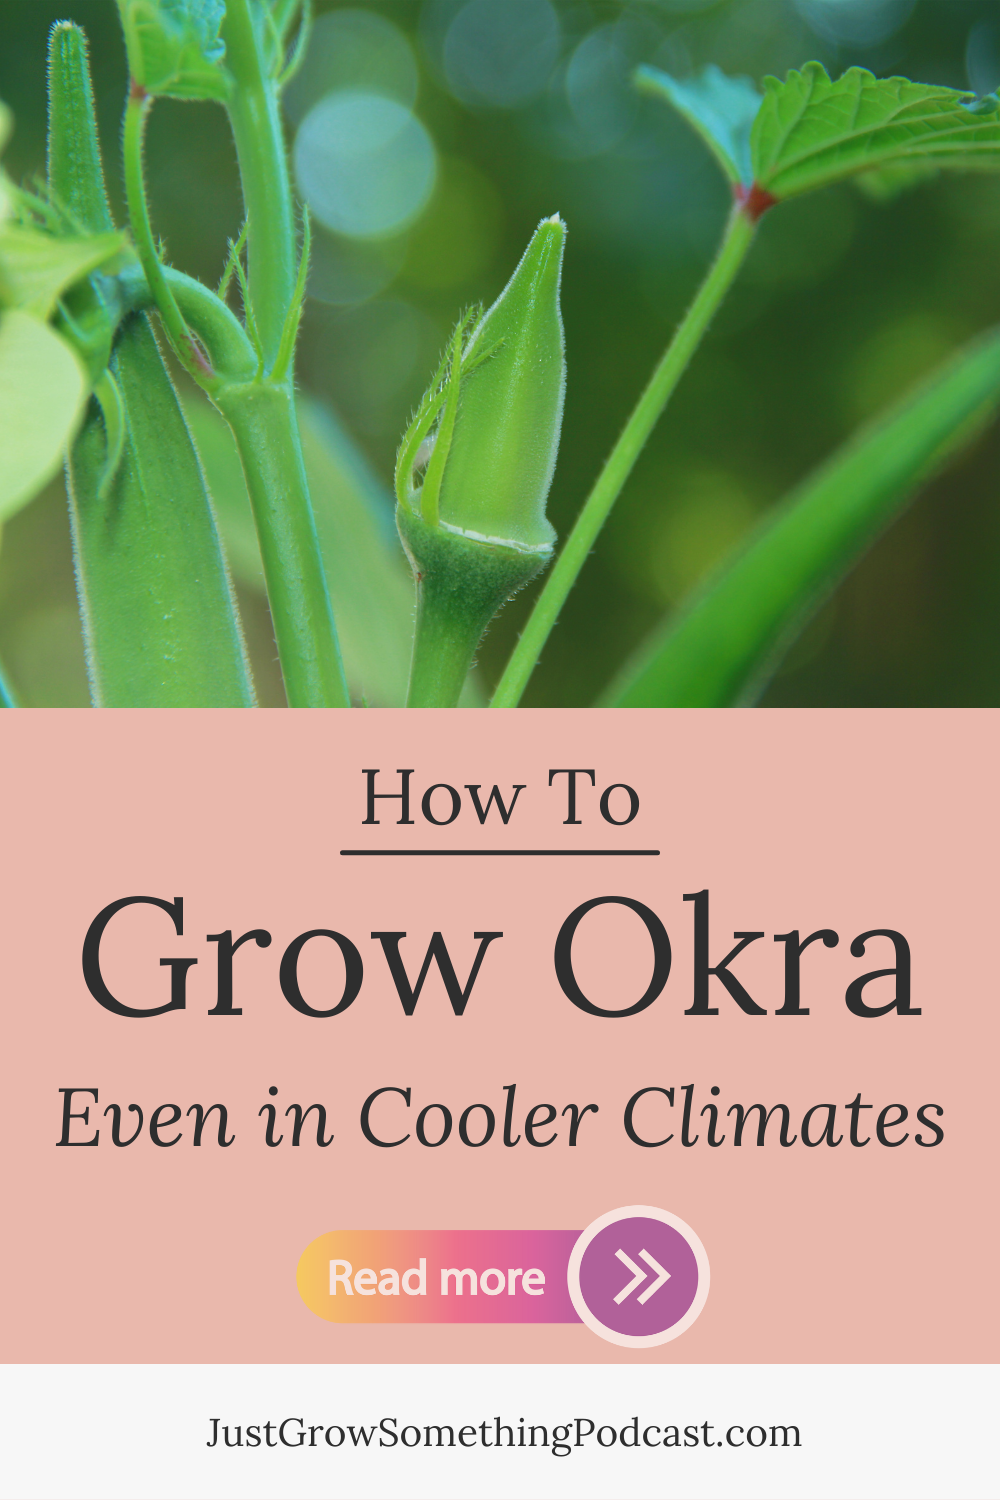 Image of okra plant that reads How To Grow Okra